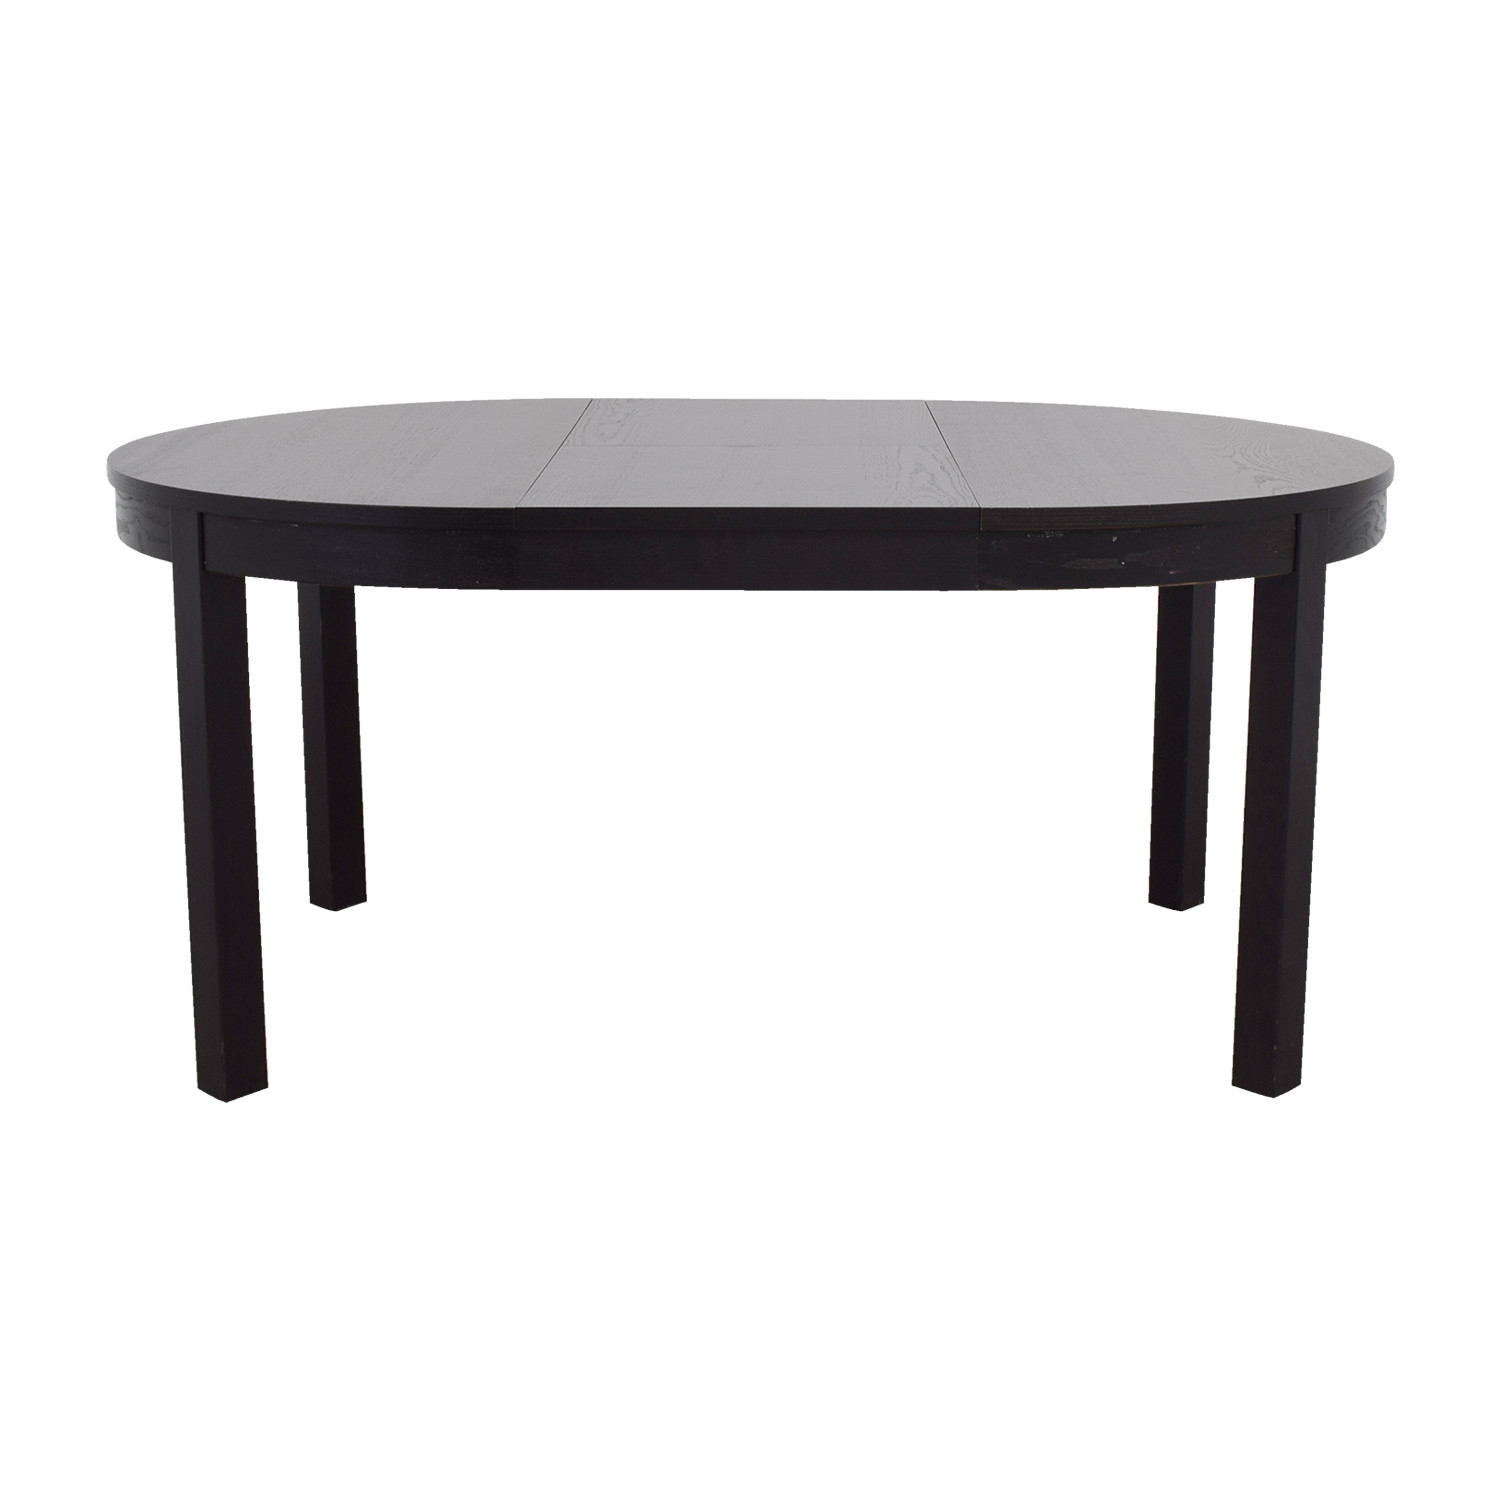 Best ideas about Ikea Round Dining Table
. Save or Pin OFF IKEA IKEA Bjursta Extendable Round to Oval Now.